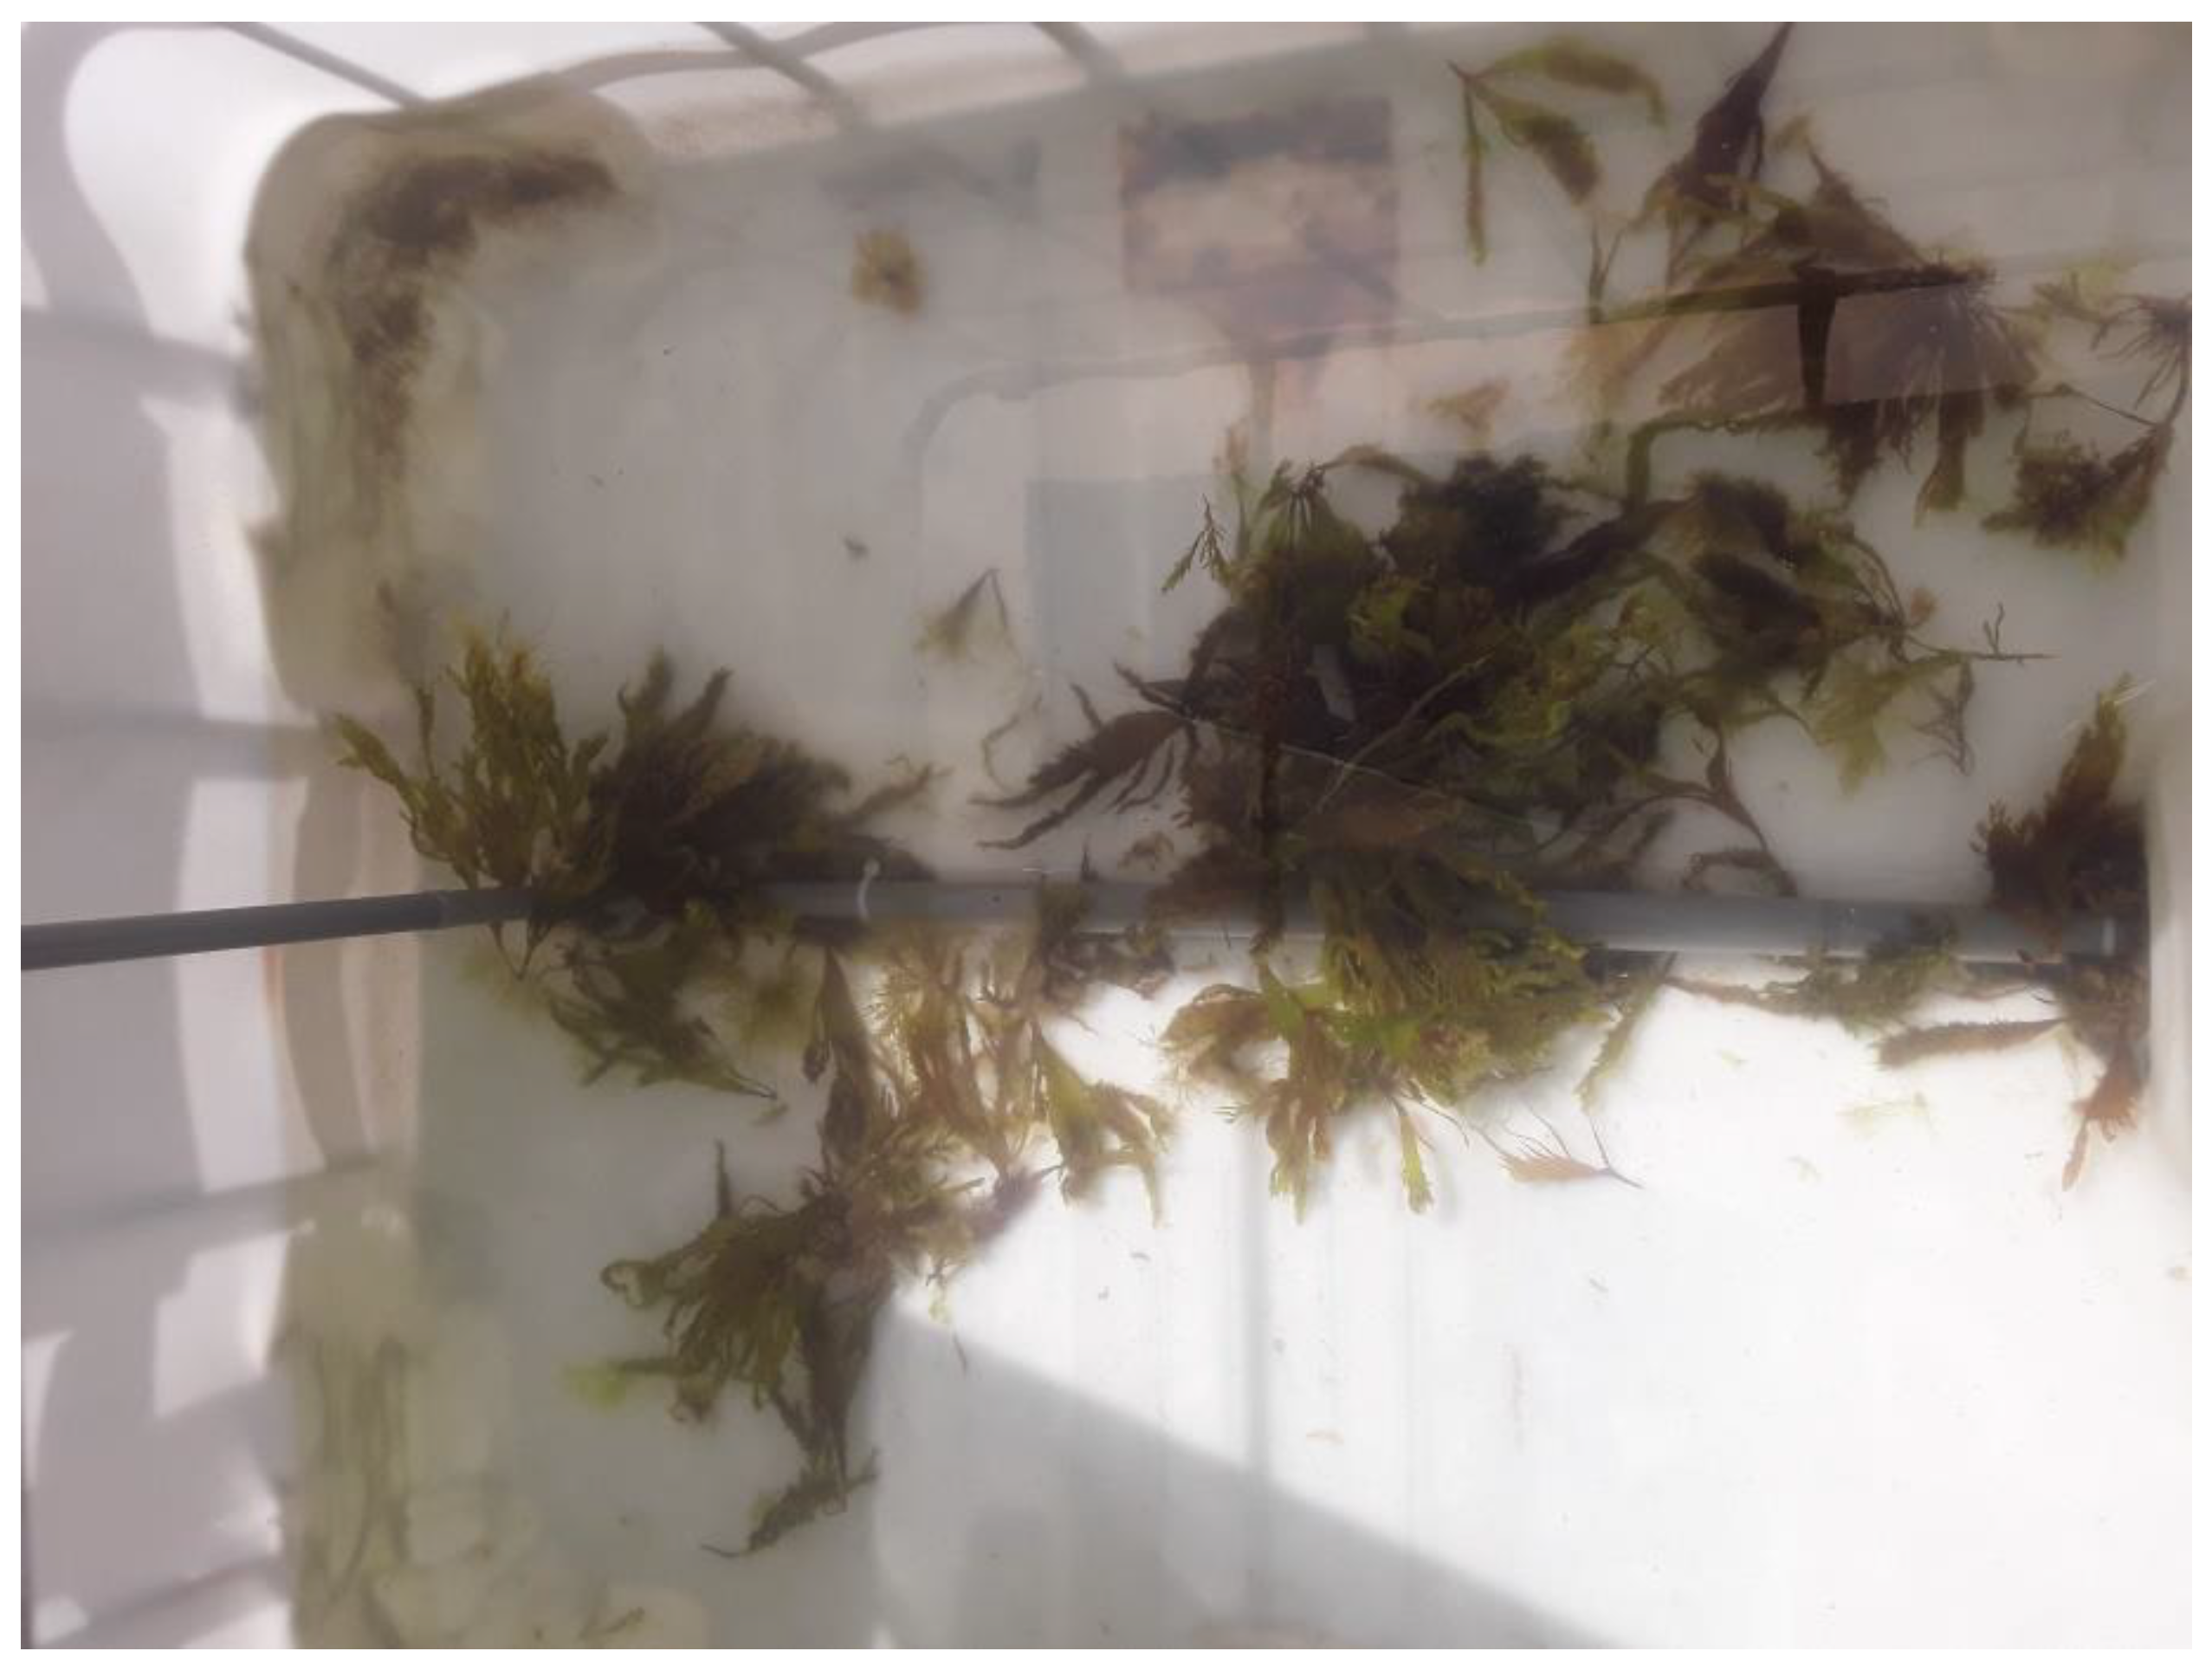 Cultivable coastal water species of Fishes, Crustaceans, Mollusks,  Seaweeds.pdf